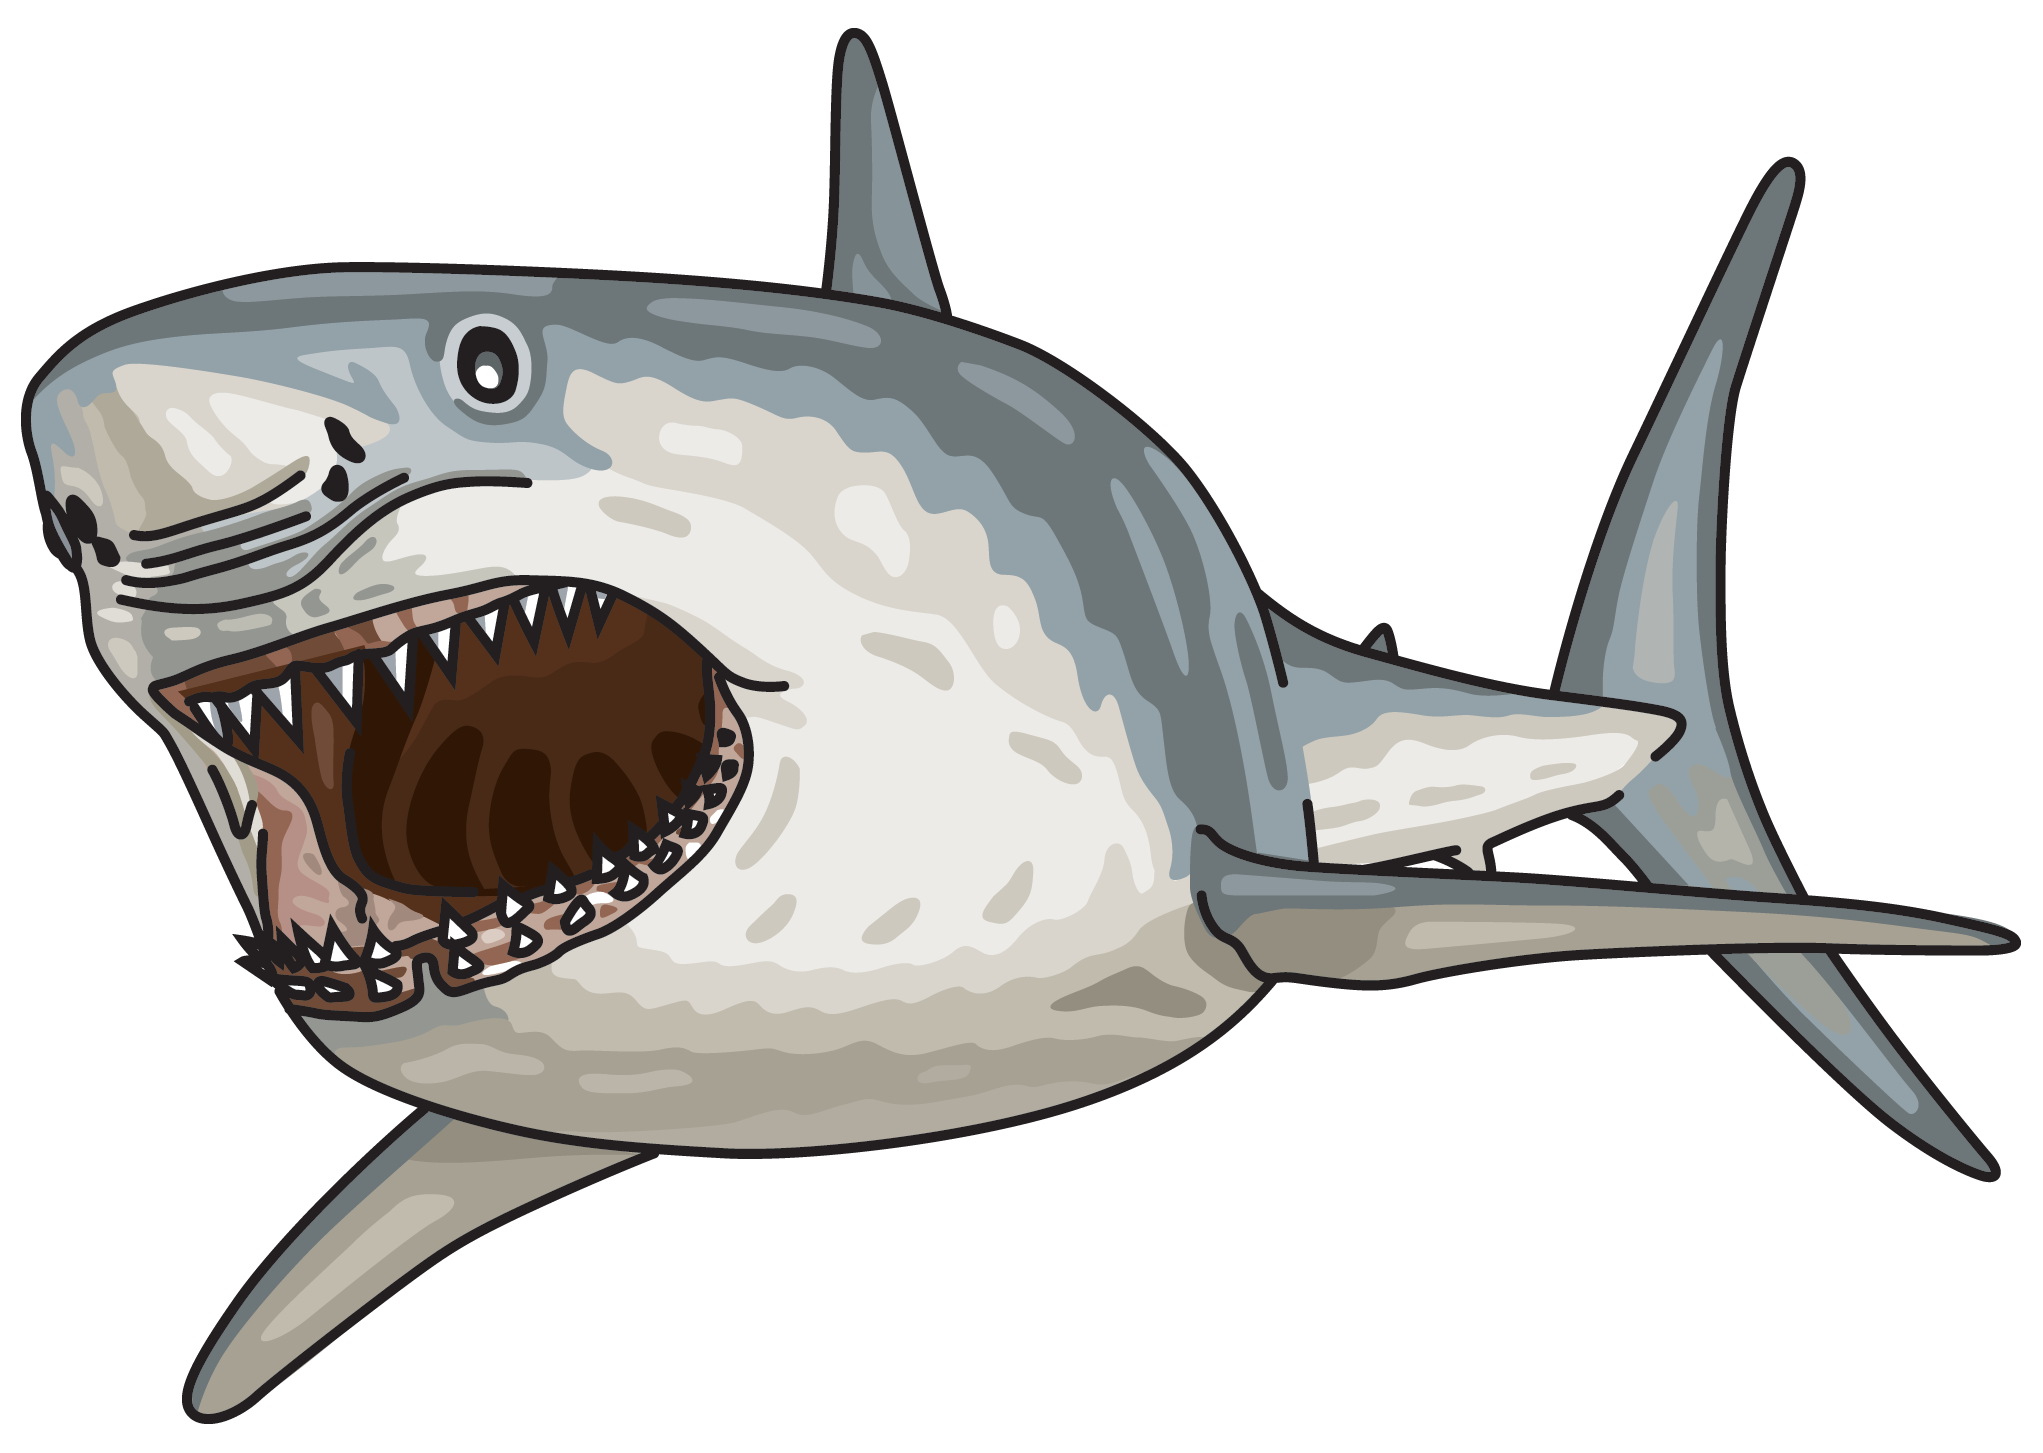 Illustration of a great white shark with mouth open